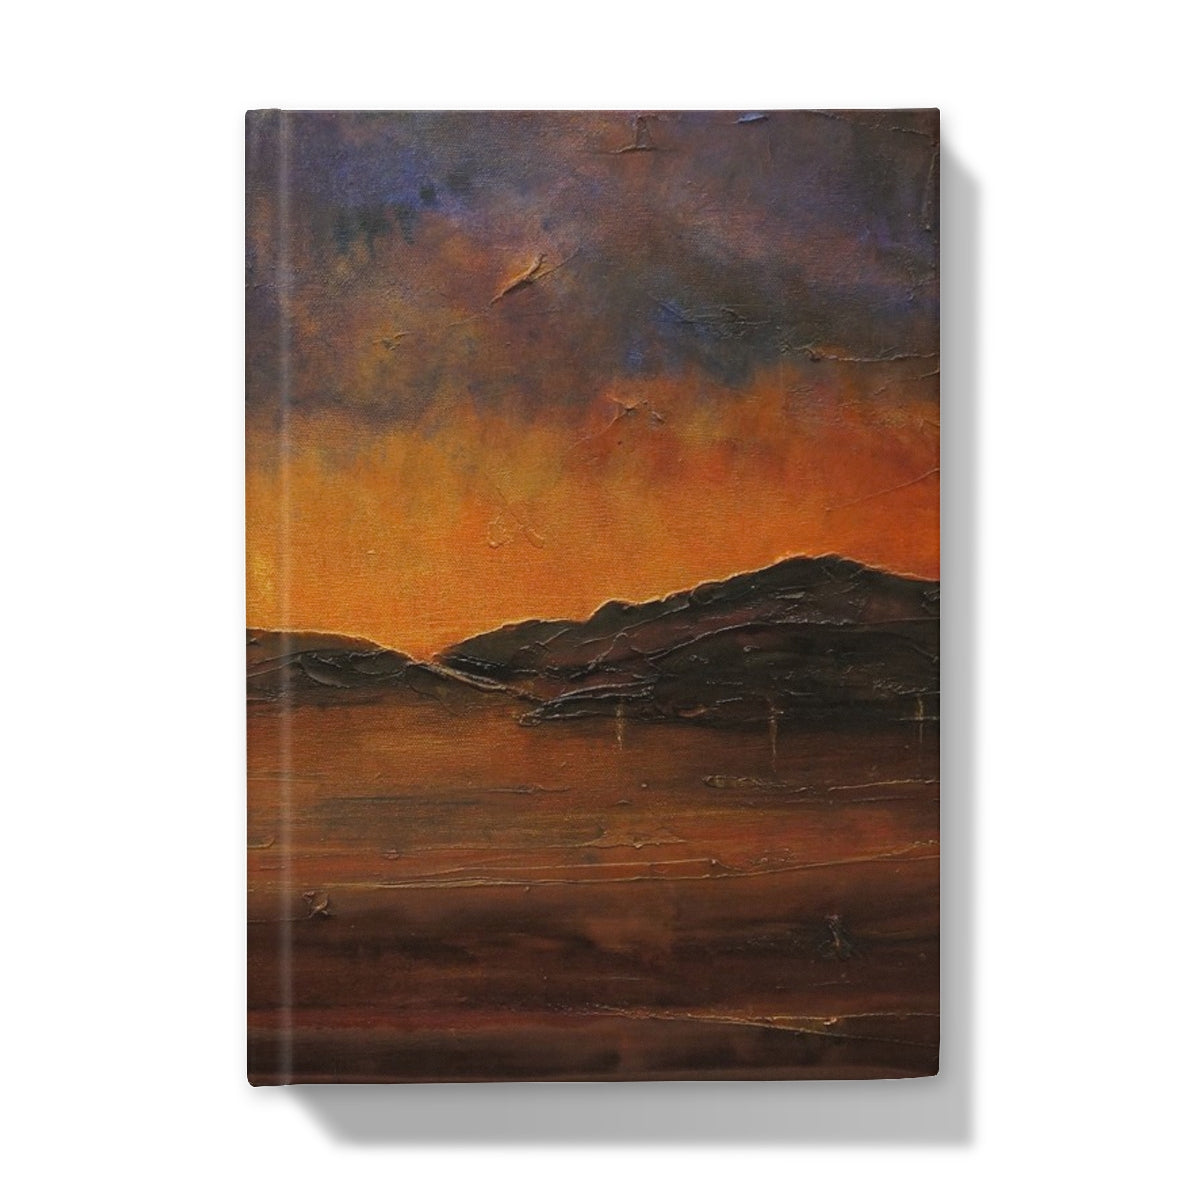 A Brooding Clyde Dusk Art Gifts Hardback Journal-Journals & Notebooks-River Clyde Art Gallery-5"x7"-Lined-Paintings, Prints, Homeware, Art Gifts From Scotland By Scottish Artist Kevin Hunter